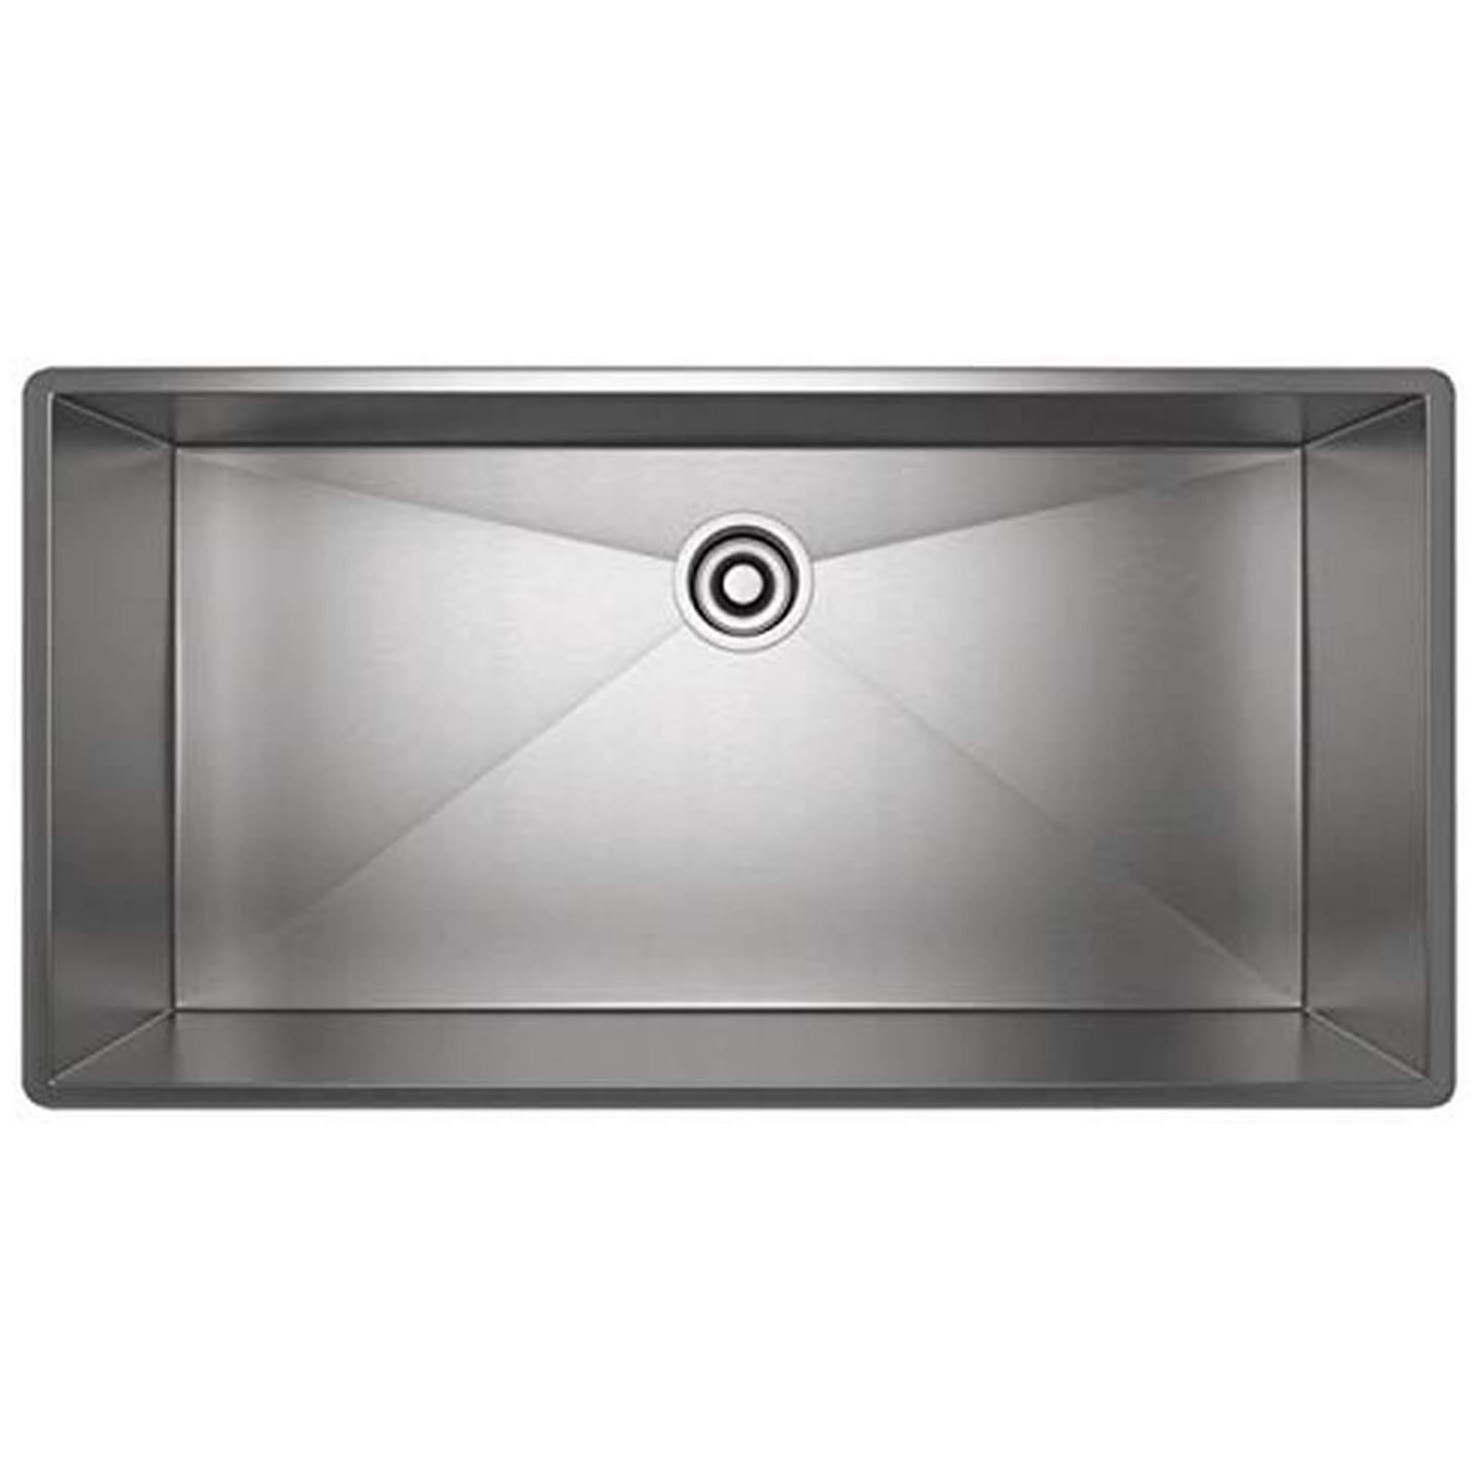 Forze 37-1/2x19-1/2x10" Kitchen Sink in Brushed Stainless